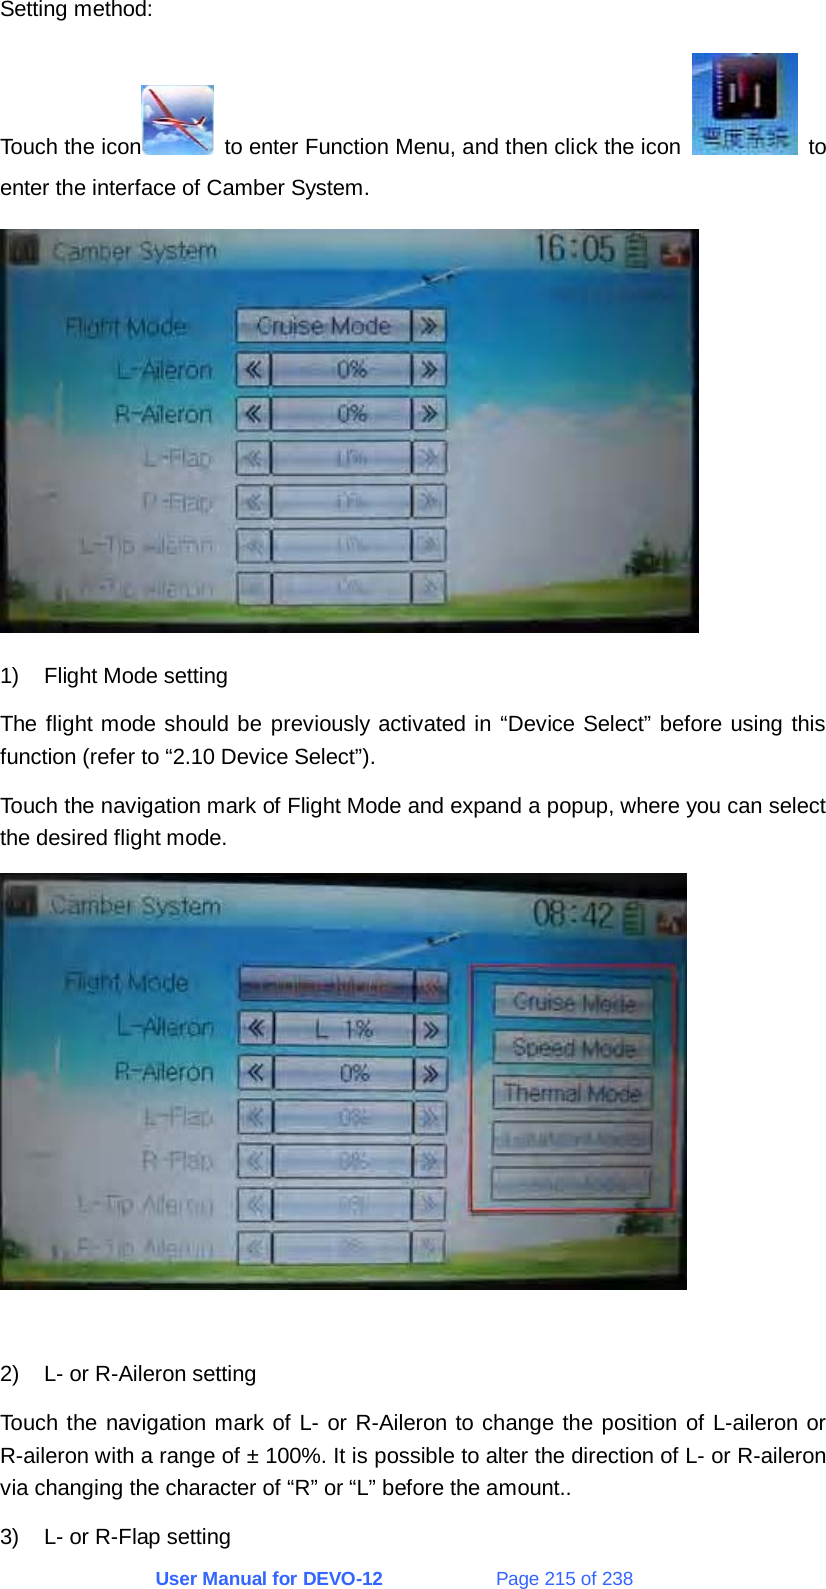 User Manual for DEVO-12             Page 215 of 238 Setting method: Touch the icon   to enter Function Menu, and then click the icon   to enter the interface of Camber System.  1)  Flight Mode setting The flight mode should be previously activated in “Device Select” before using this function (refer to “2.10 Device Select”). Touch the navigation mark of Flight Mode and expand a popup, where you can select the desired flight mode.   2)  L- or R-Aileron setting Touch the navigation mark of L- or R-Aileron to change the position of L-aileron or R-aileron with a range of ± 100%. It is possible to alter the direction of L- or R-aileron via changing the character of “R” or “L” before the amount.. 3)  L- or R-Flap setting 